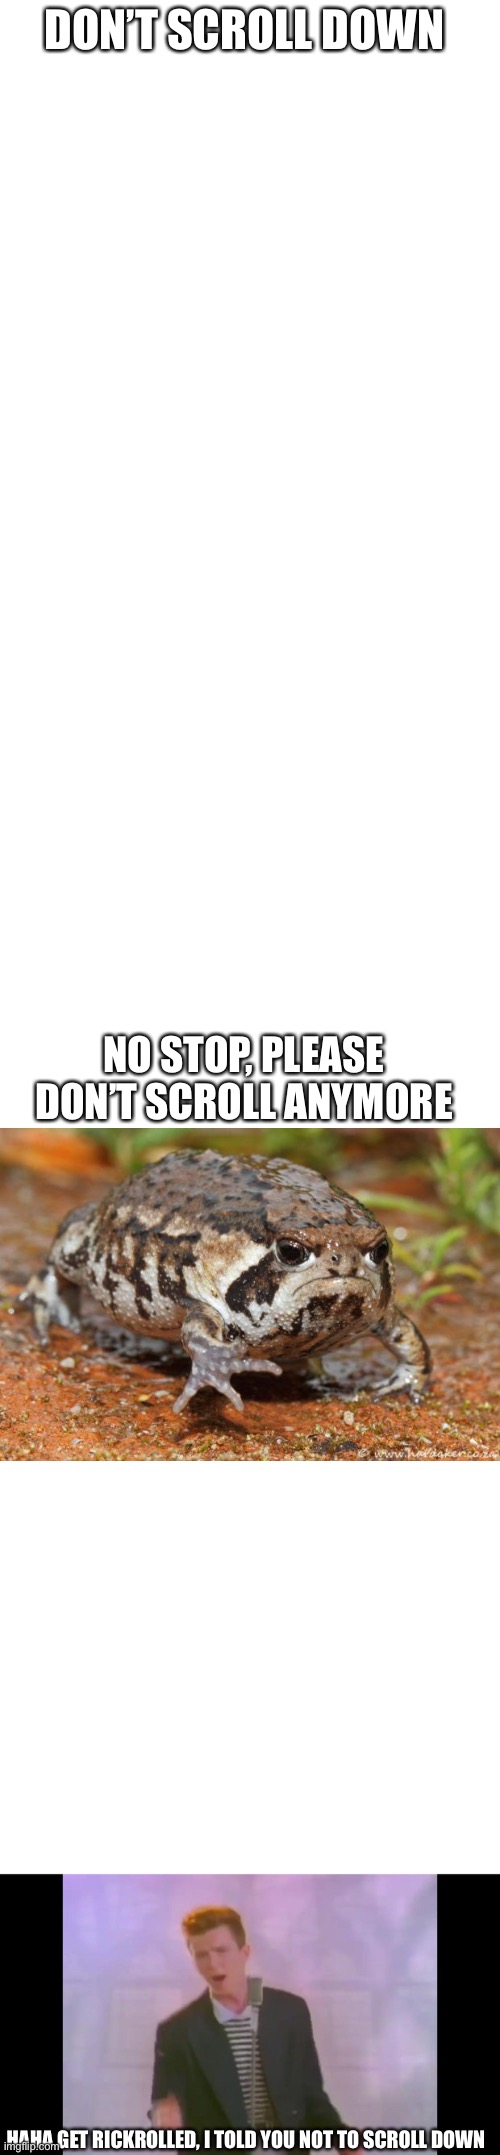 Don’t scroll down | DON’T SCROLL DOWN; NO STOP, PLEASE DON’T SCROLL ANYMORE; HAHA GET RICKROLLED, I TOLD YOU NOT TO SCROLL DOWN | image tagged in blank white template,grumpy toad | made w/ Imgflip meme maker